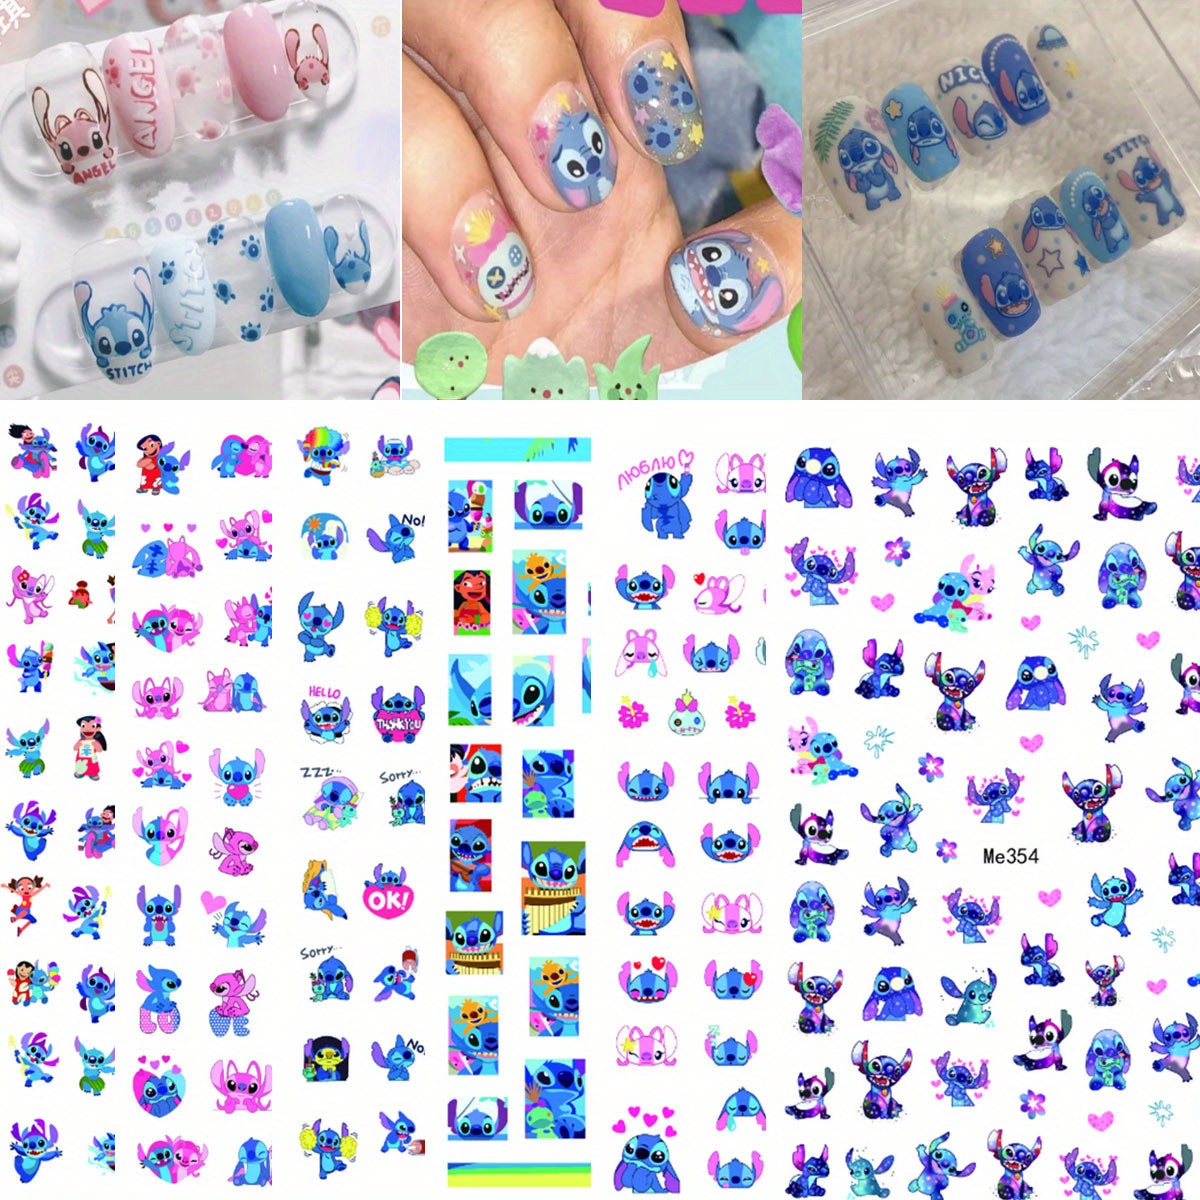 

Disney Stitch Nail Art Stickers - Cute Cartoon Decals For Girls, Matte Finish, Self-adhesive & Sparkle Accents, Perfect Gift